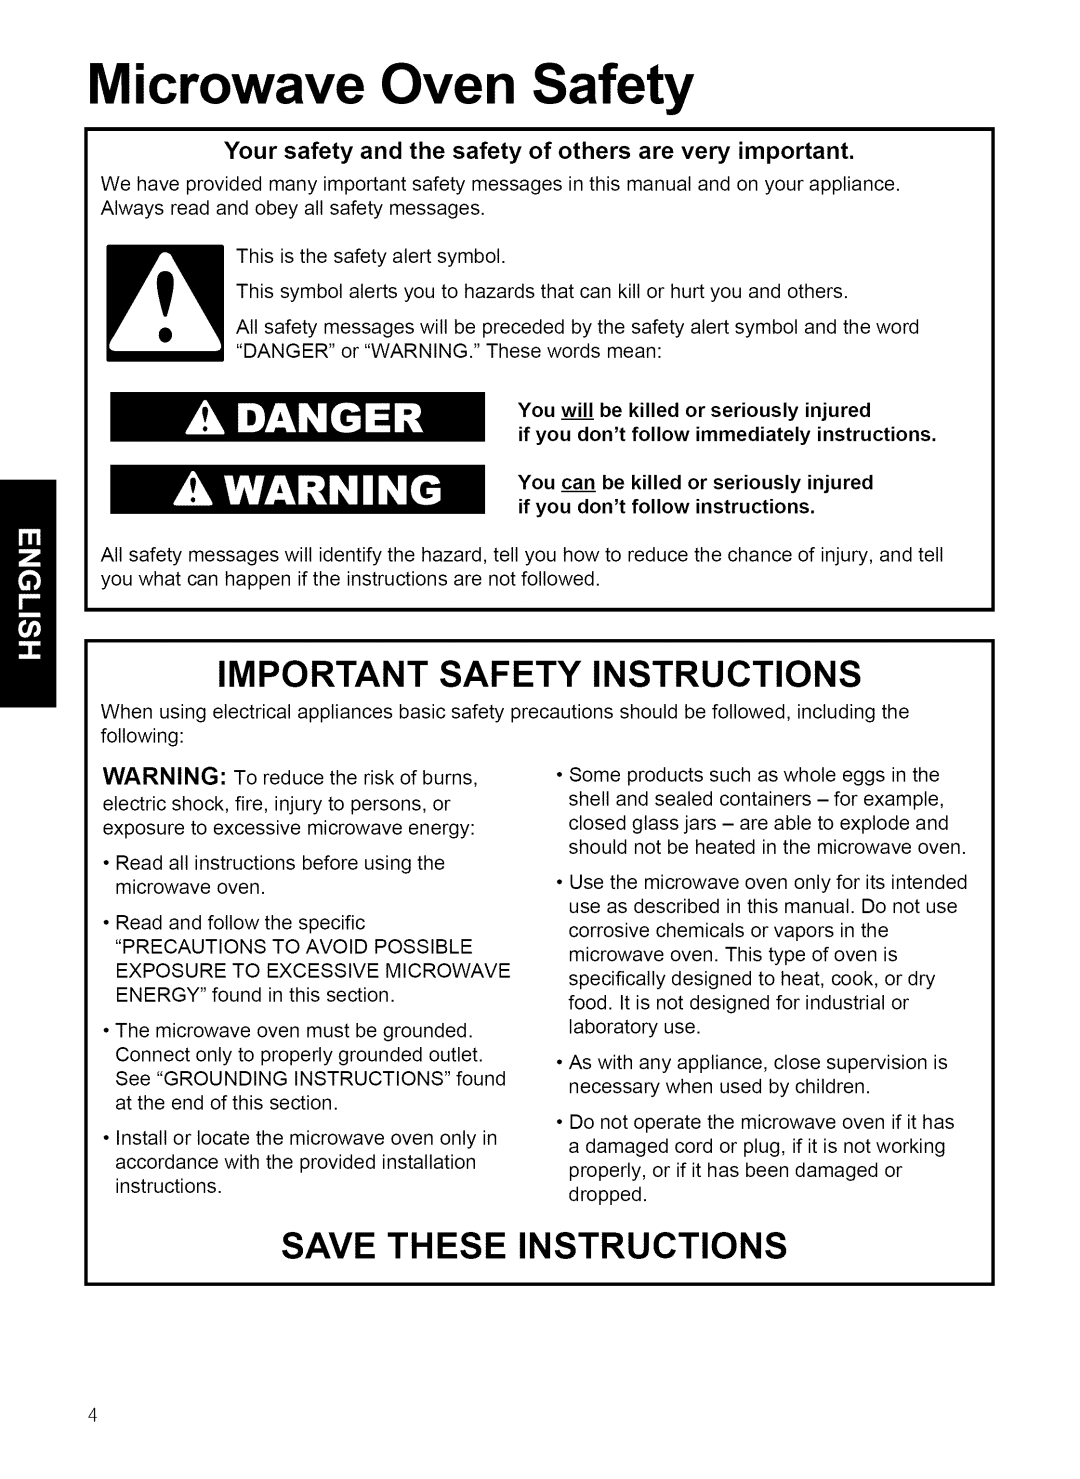 Kenmore 721.80864, 721.80863, 721.80862 manual Microwave Oven Safety, Important Safety Instructions, Save These Instructions 